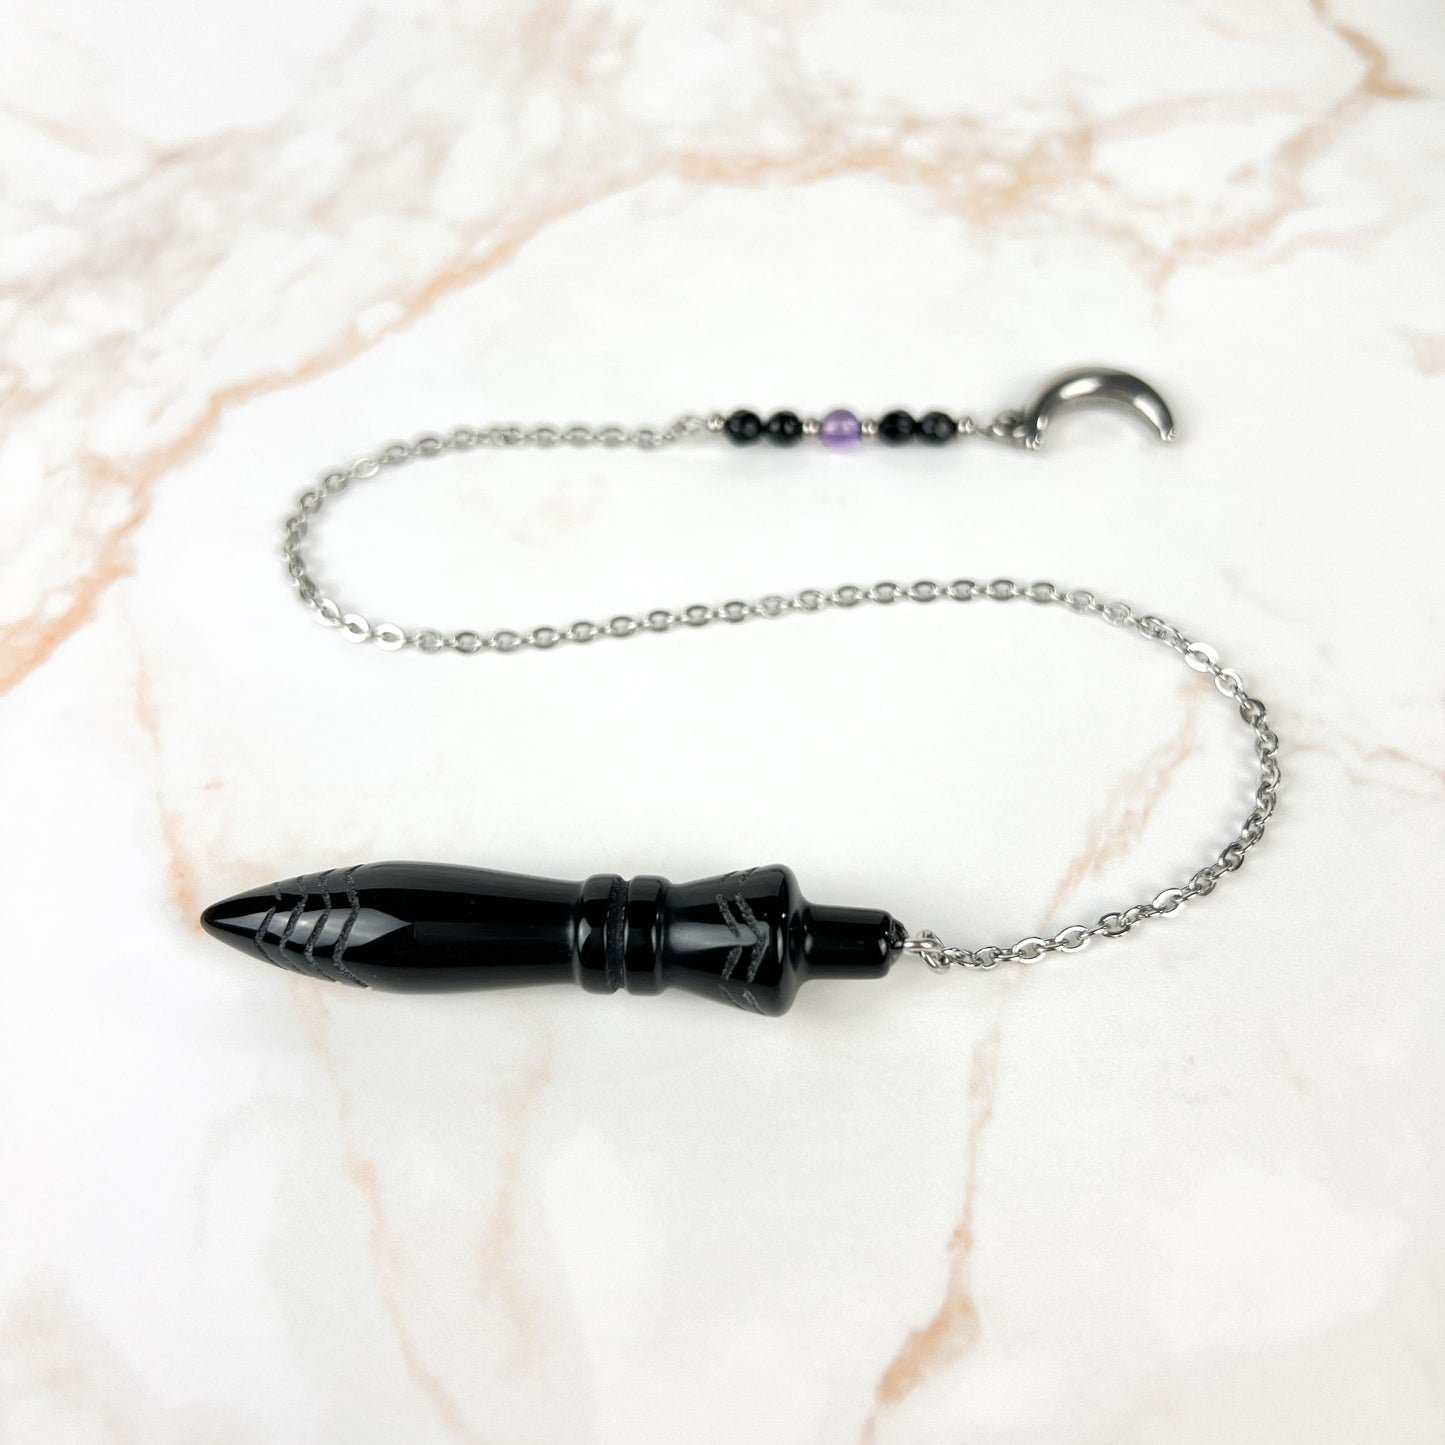 Engraved Egyptian Thot pendulum, obsidian, onyx, amethyst, stainless steel, Moon crescent charm